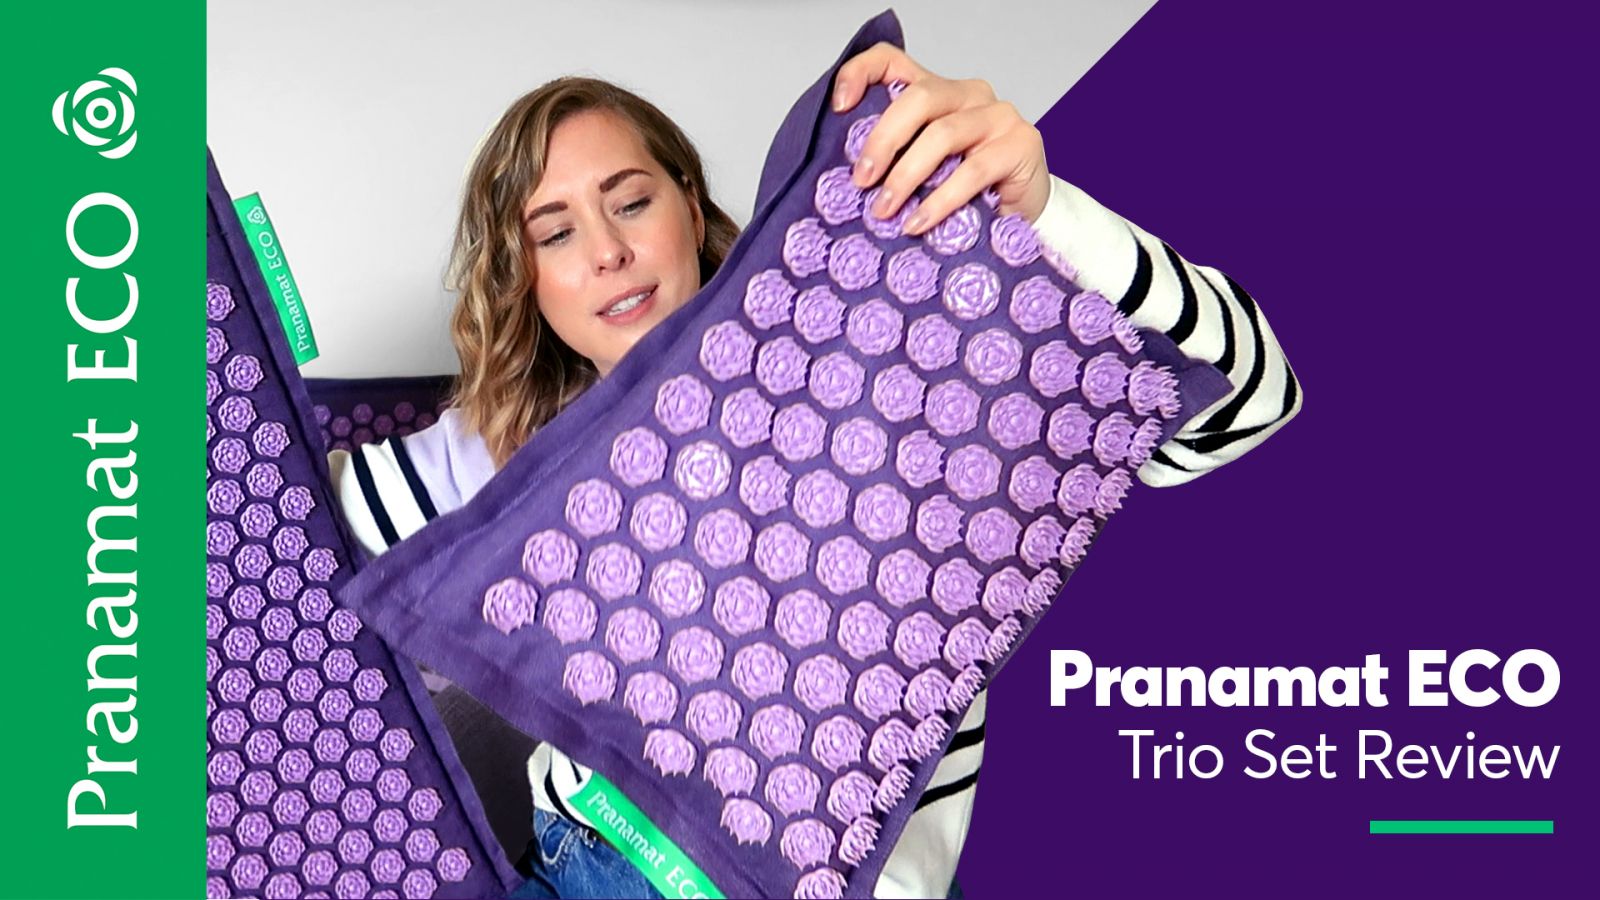 Getting Rid of Back Pain & Fatigue With My Pranamat - Diary of a Fit Mommy